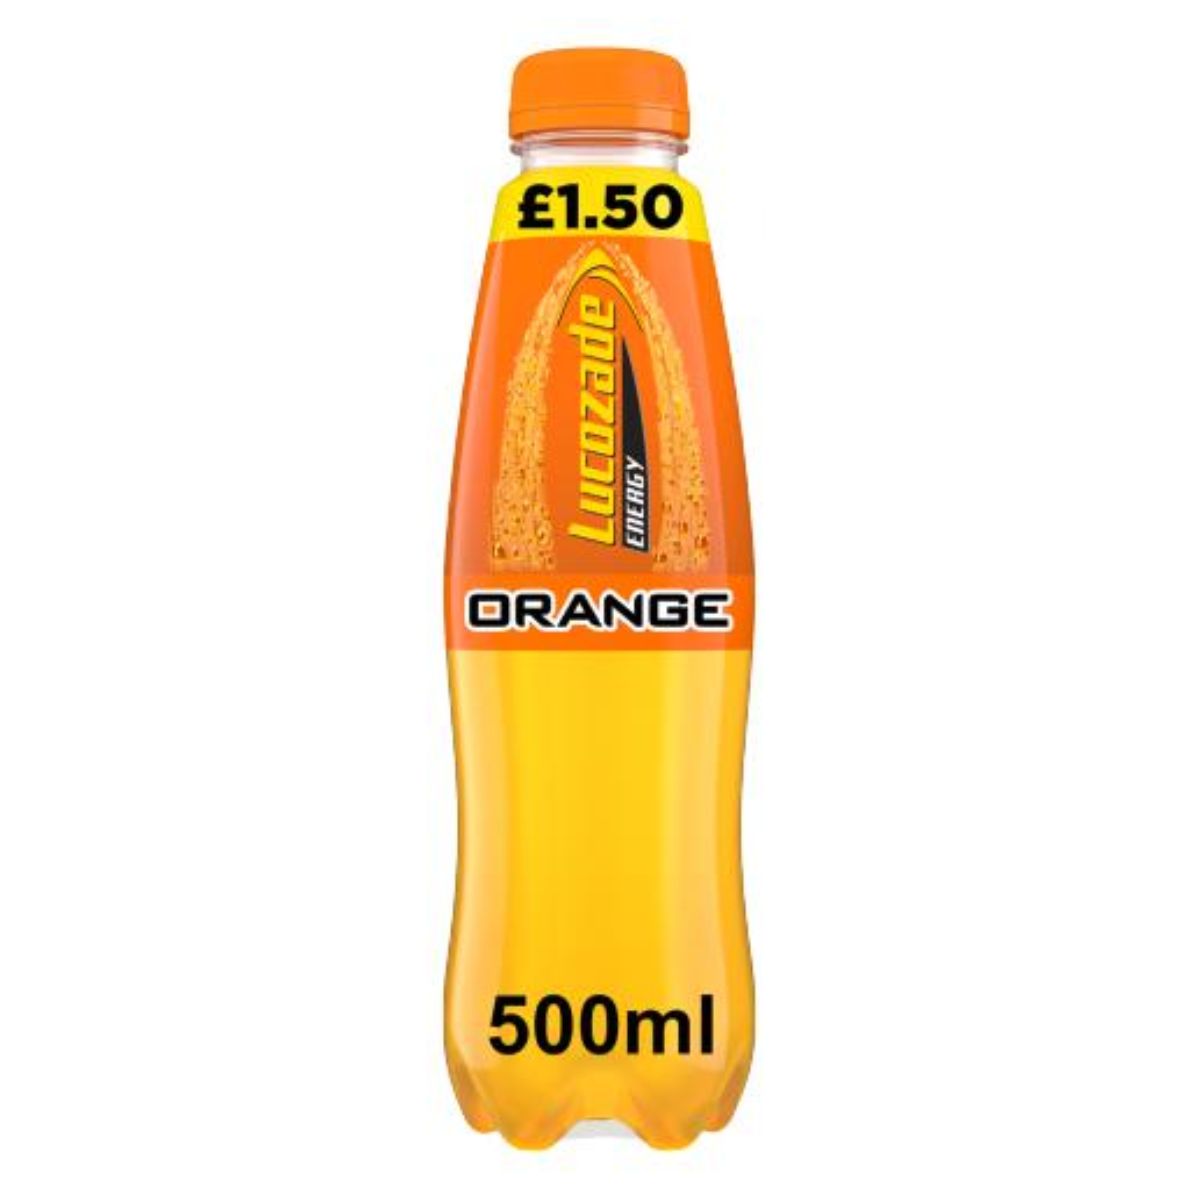 A 500ml bottle of Lucozade - Energy Drink Orange - 500ml, featuring a price label of £1.50 at the top, keeps you energized and hydrated with its refreshing orange flavor.